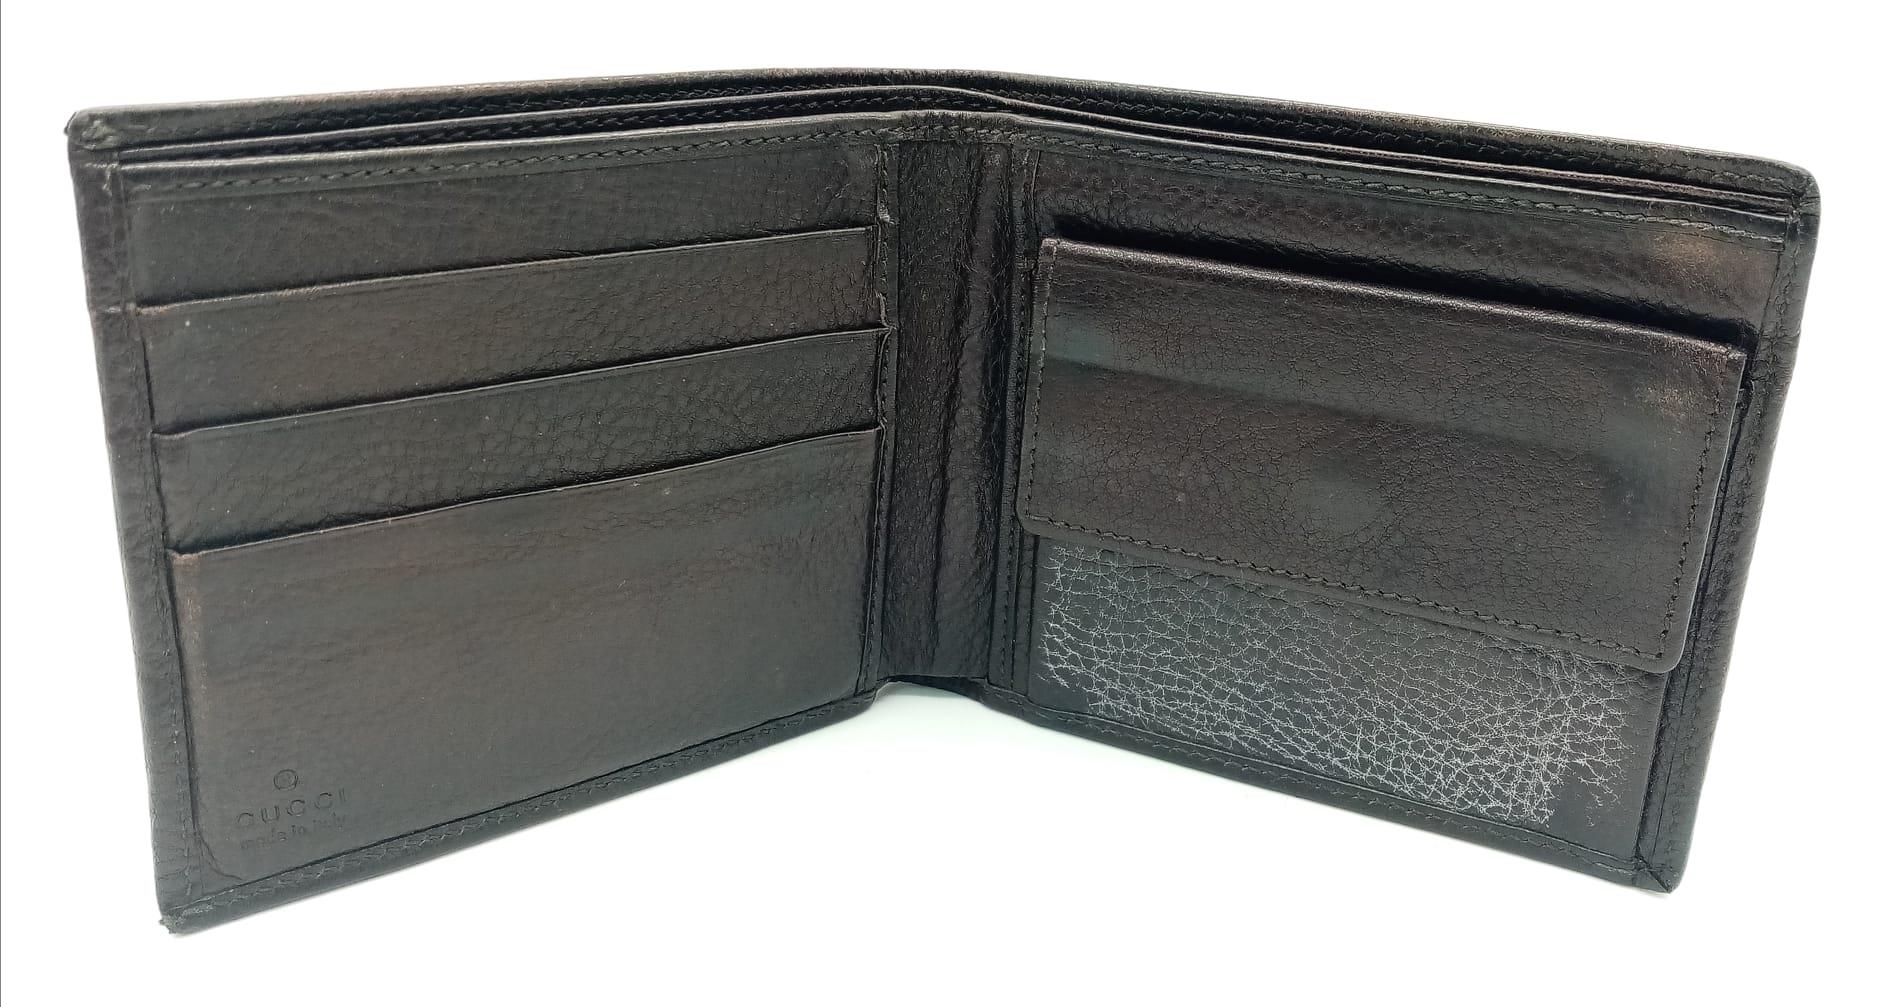 A dark brown leather Gucci card wallet, 3 card holders with a popper pocket. Size approx. - Bild 3 aus 6